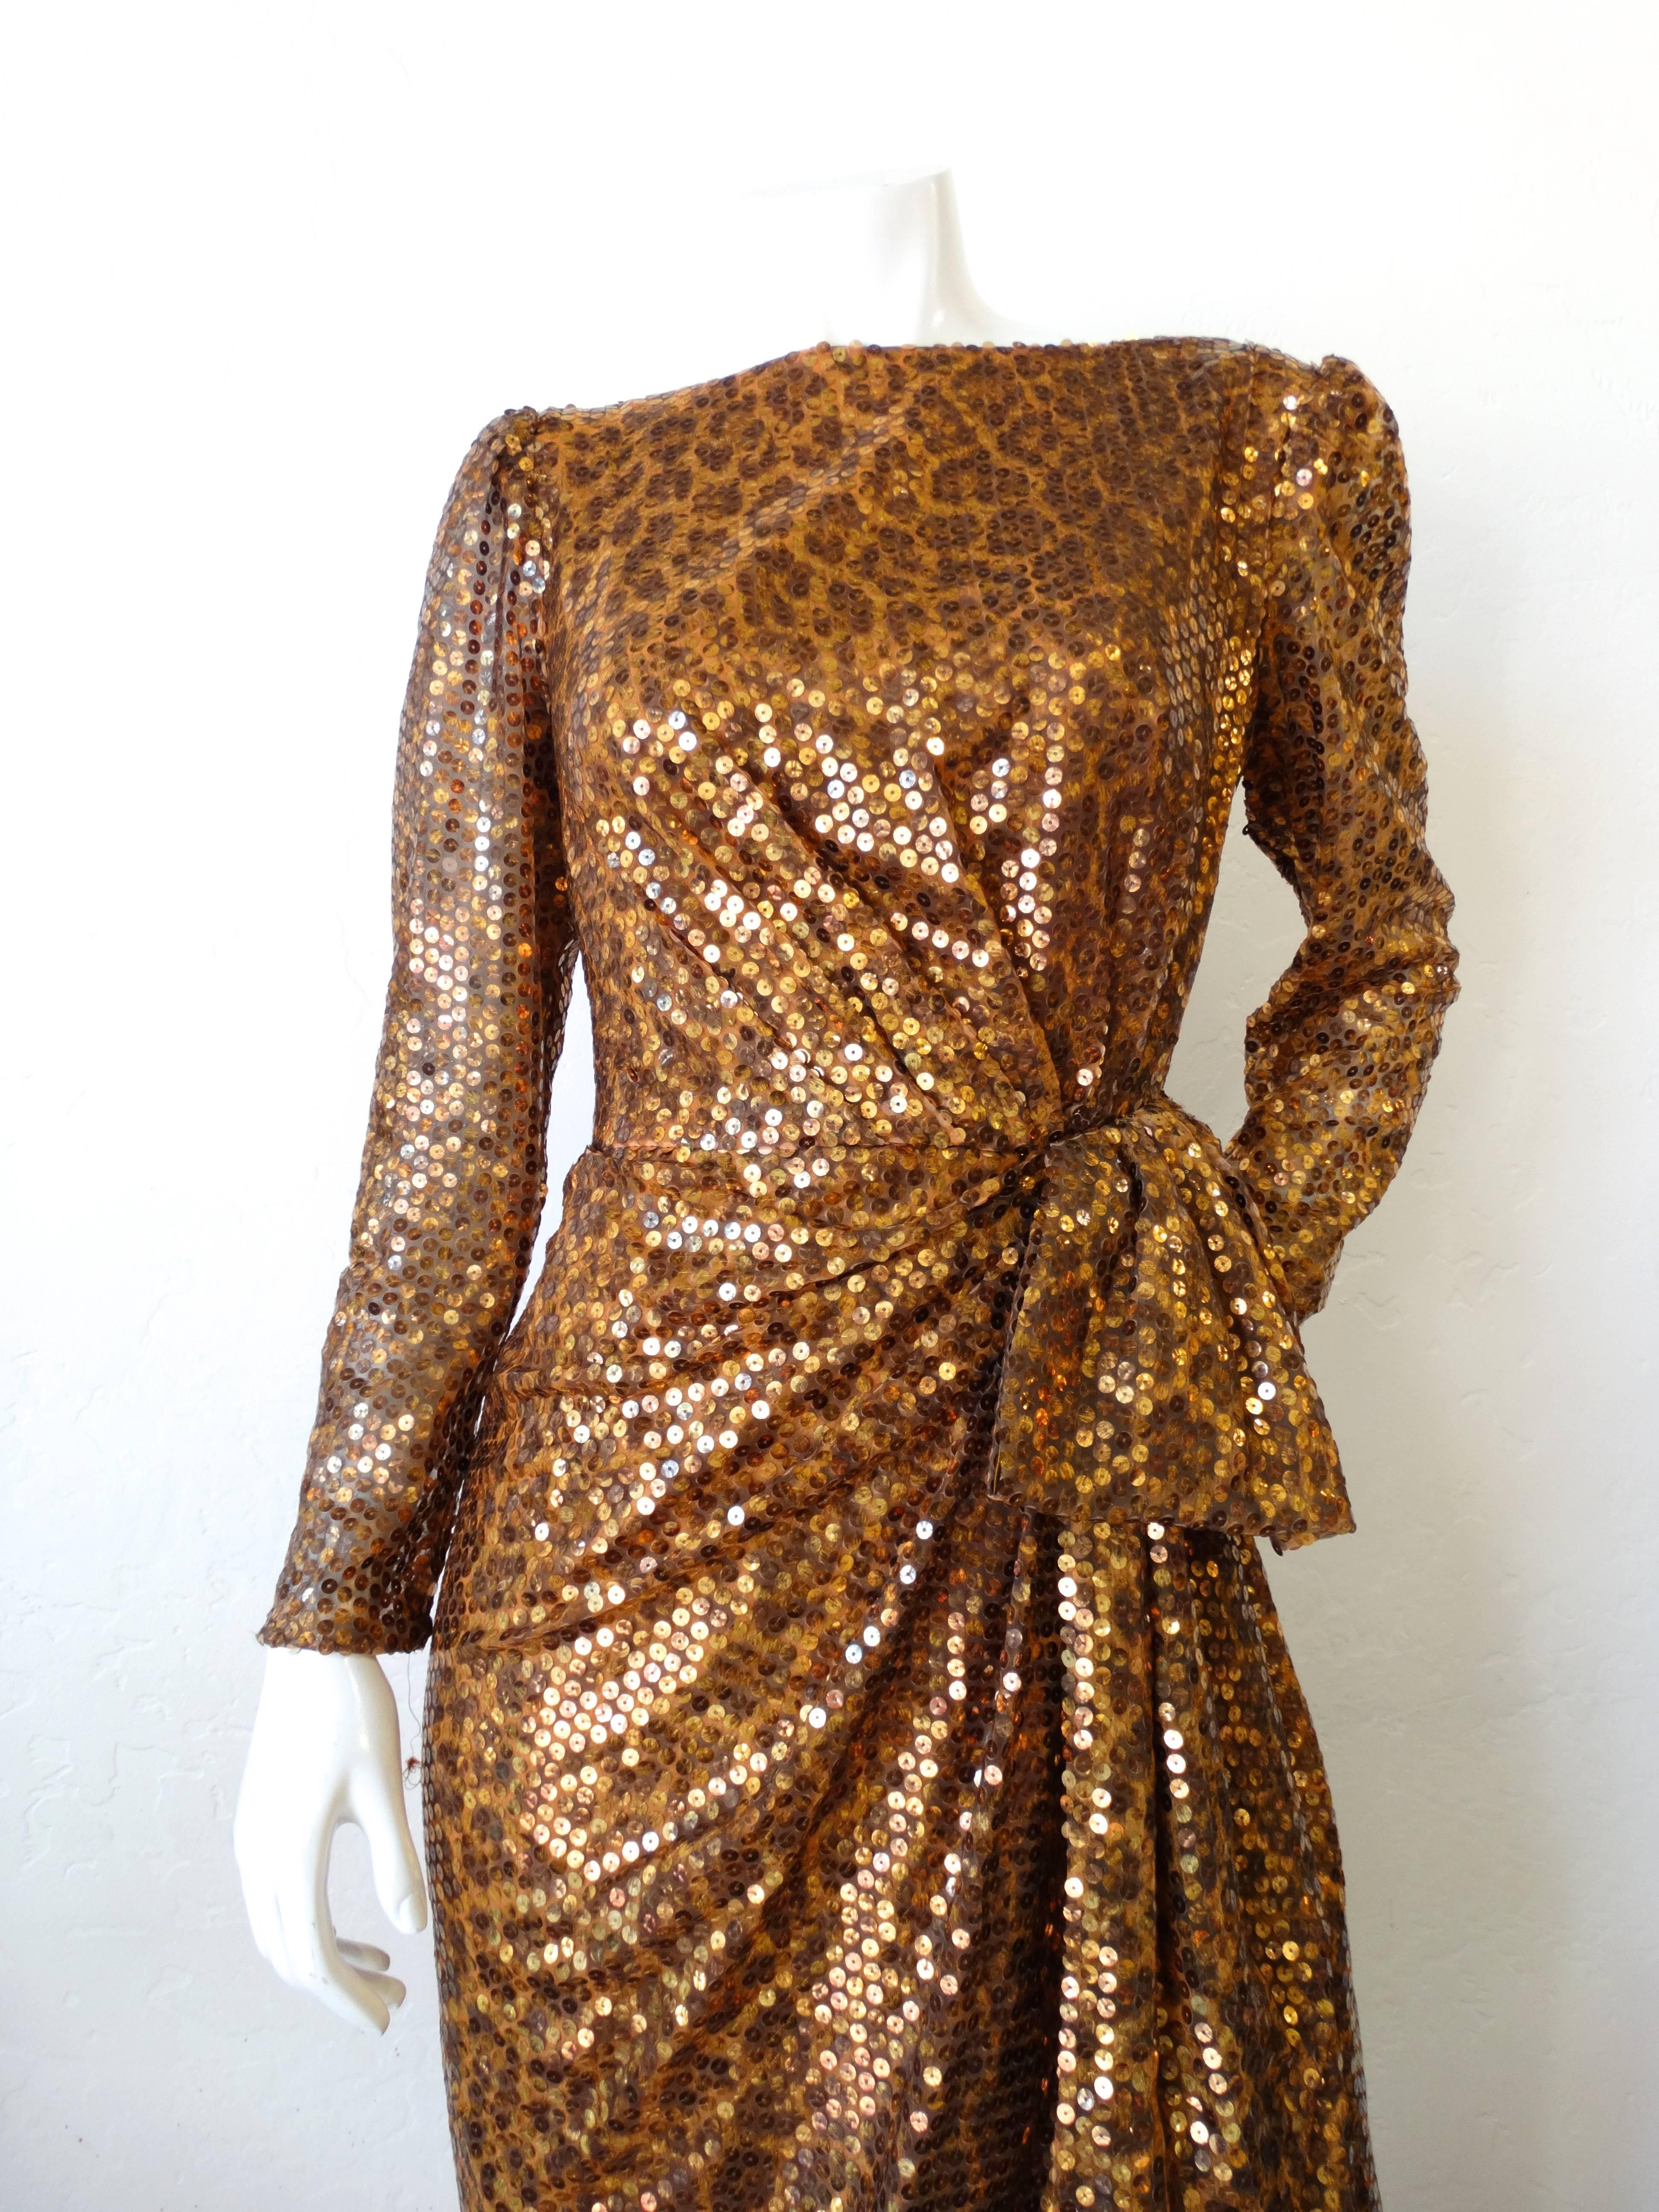 What's better than leopard? Leopard AND sequins of course! Rock the holidays in our incredible 1980s Saks Fifth Avenue x Mignon dress! Made of a subtle leopard fabric bedazzled completely in iridescent gold sequins. The fit of this dress is